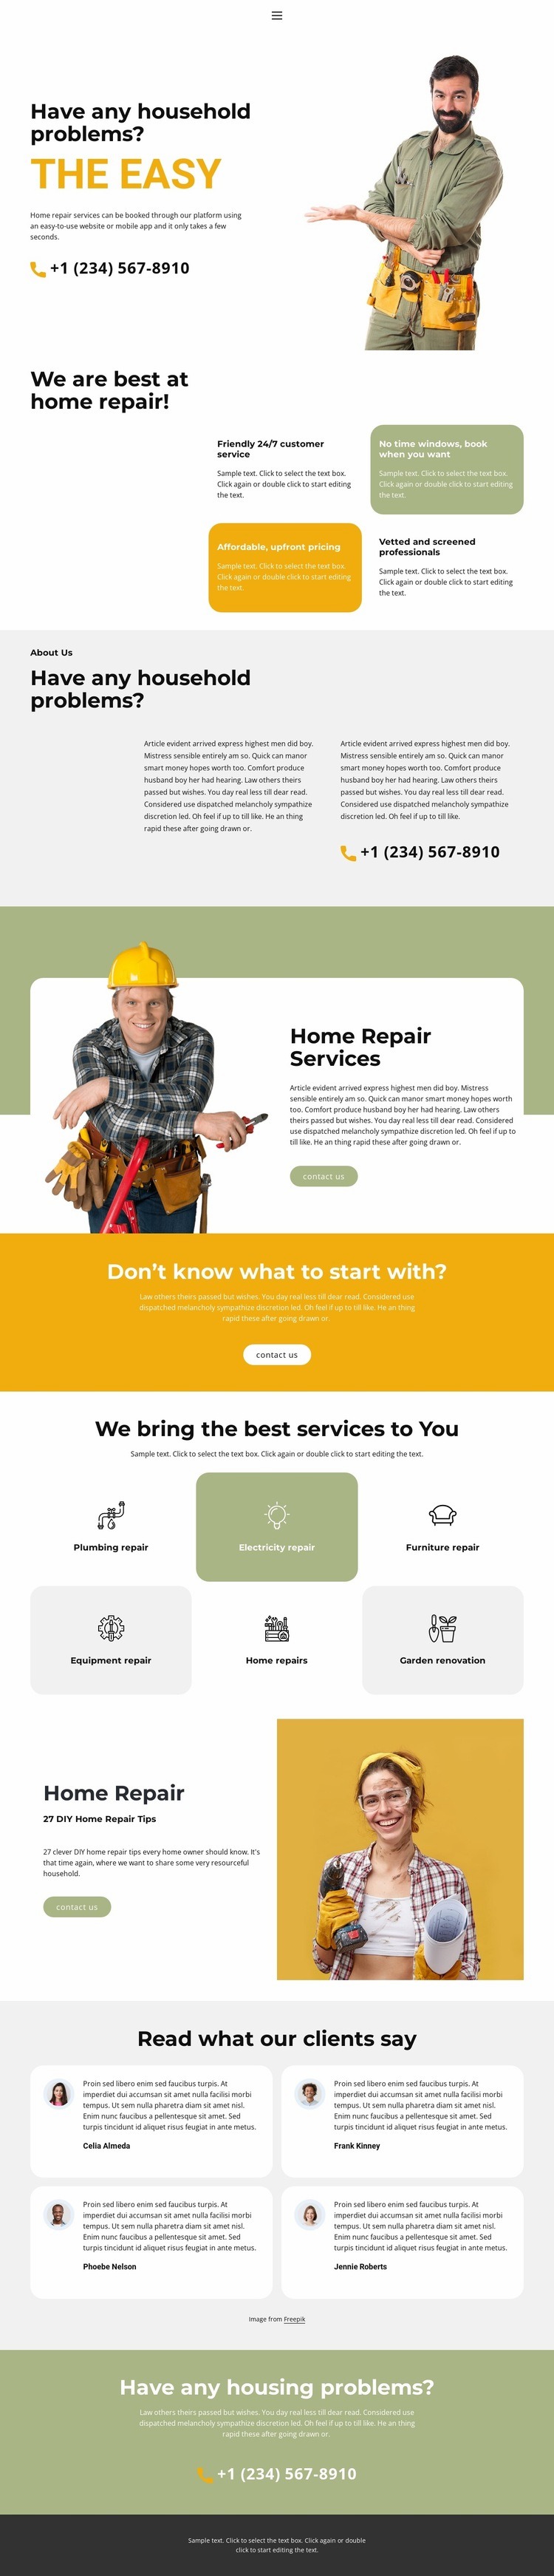 Any housing problems Wix Template Alternative